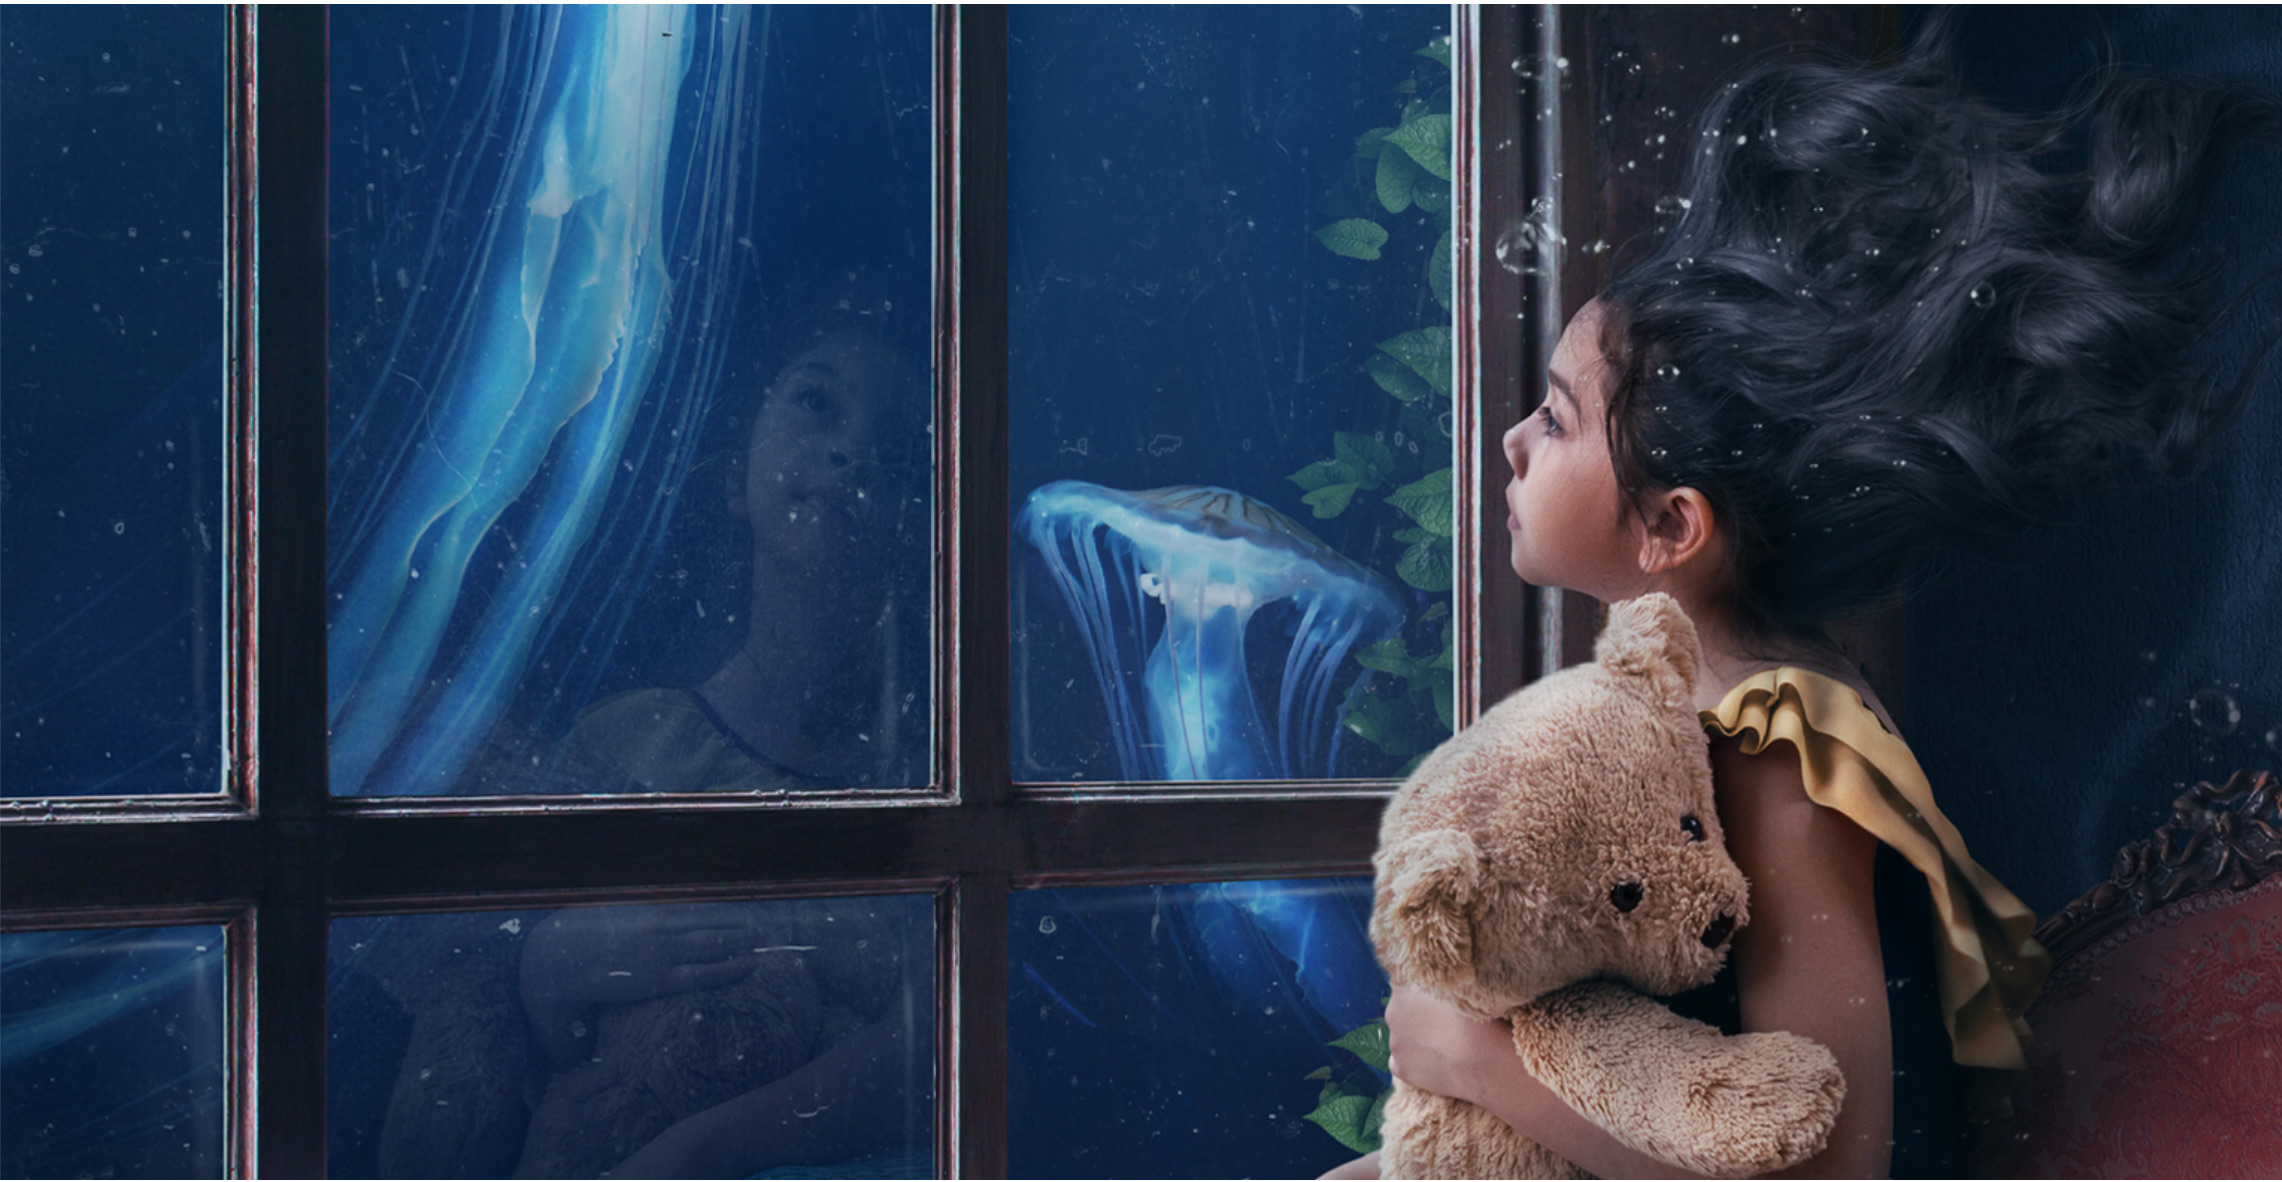 photo manipulation of little girl with floating hair with the ocean outside the window